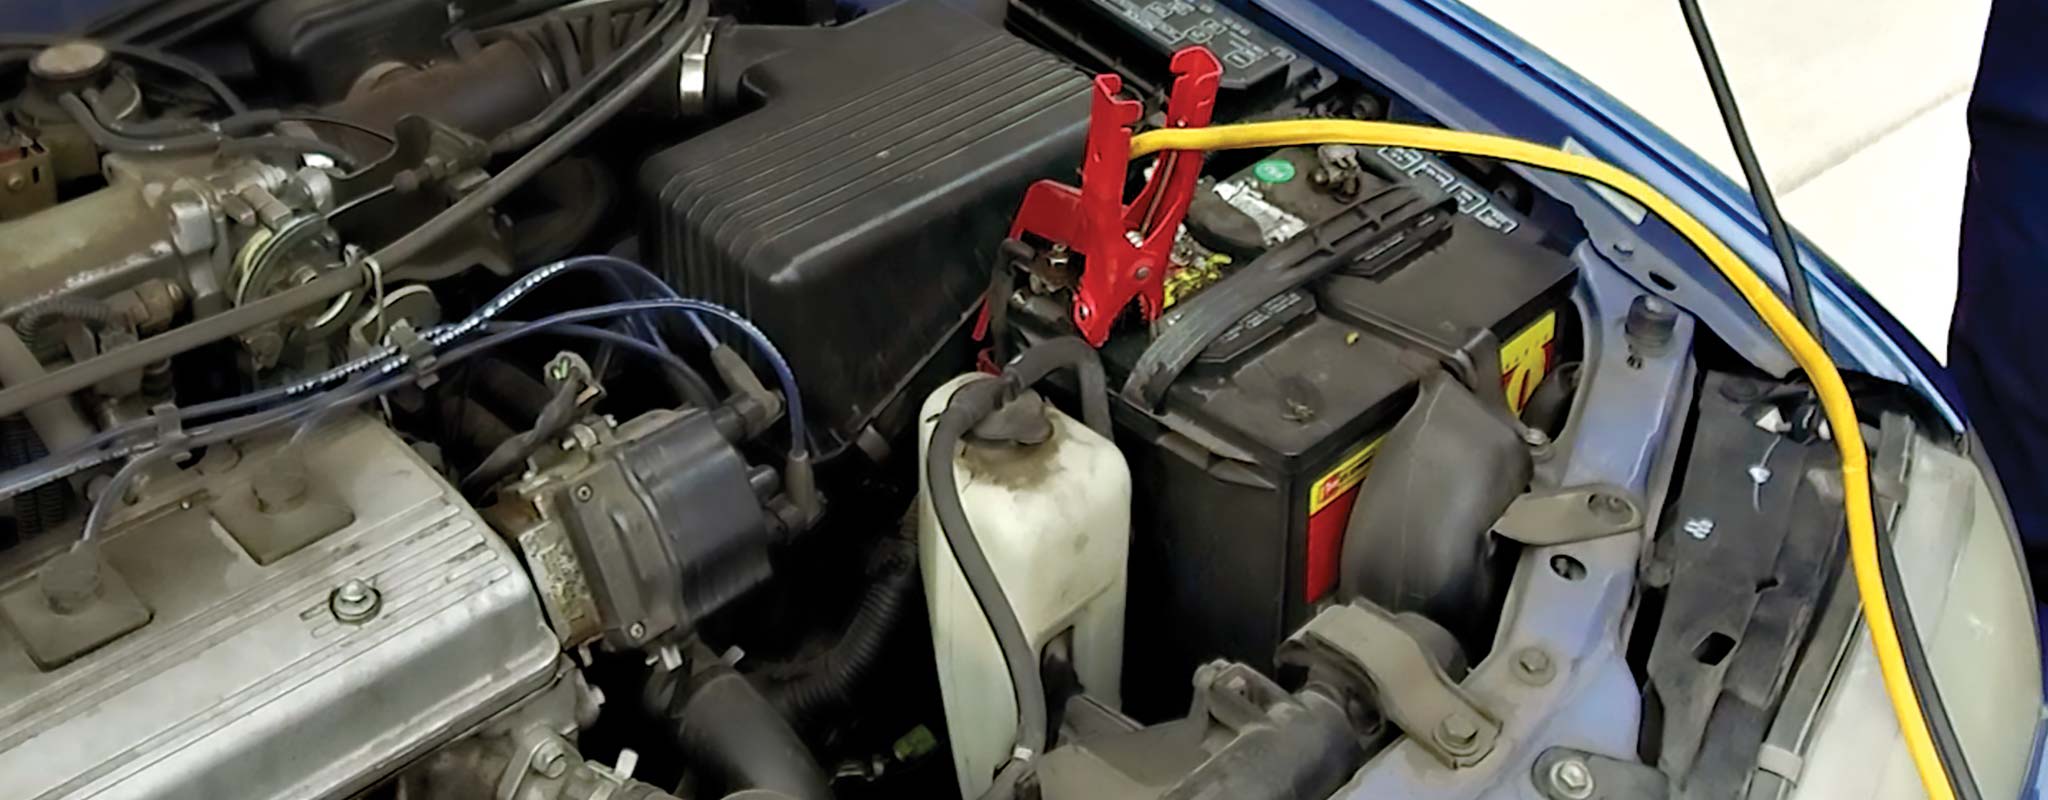 A car battery under the hood with jumper cables attached.